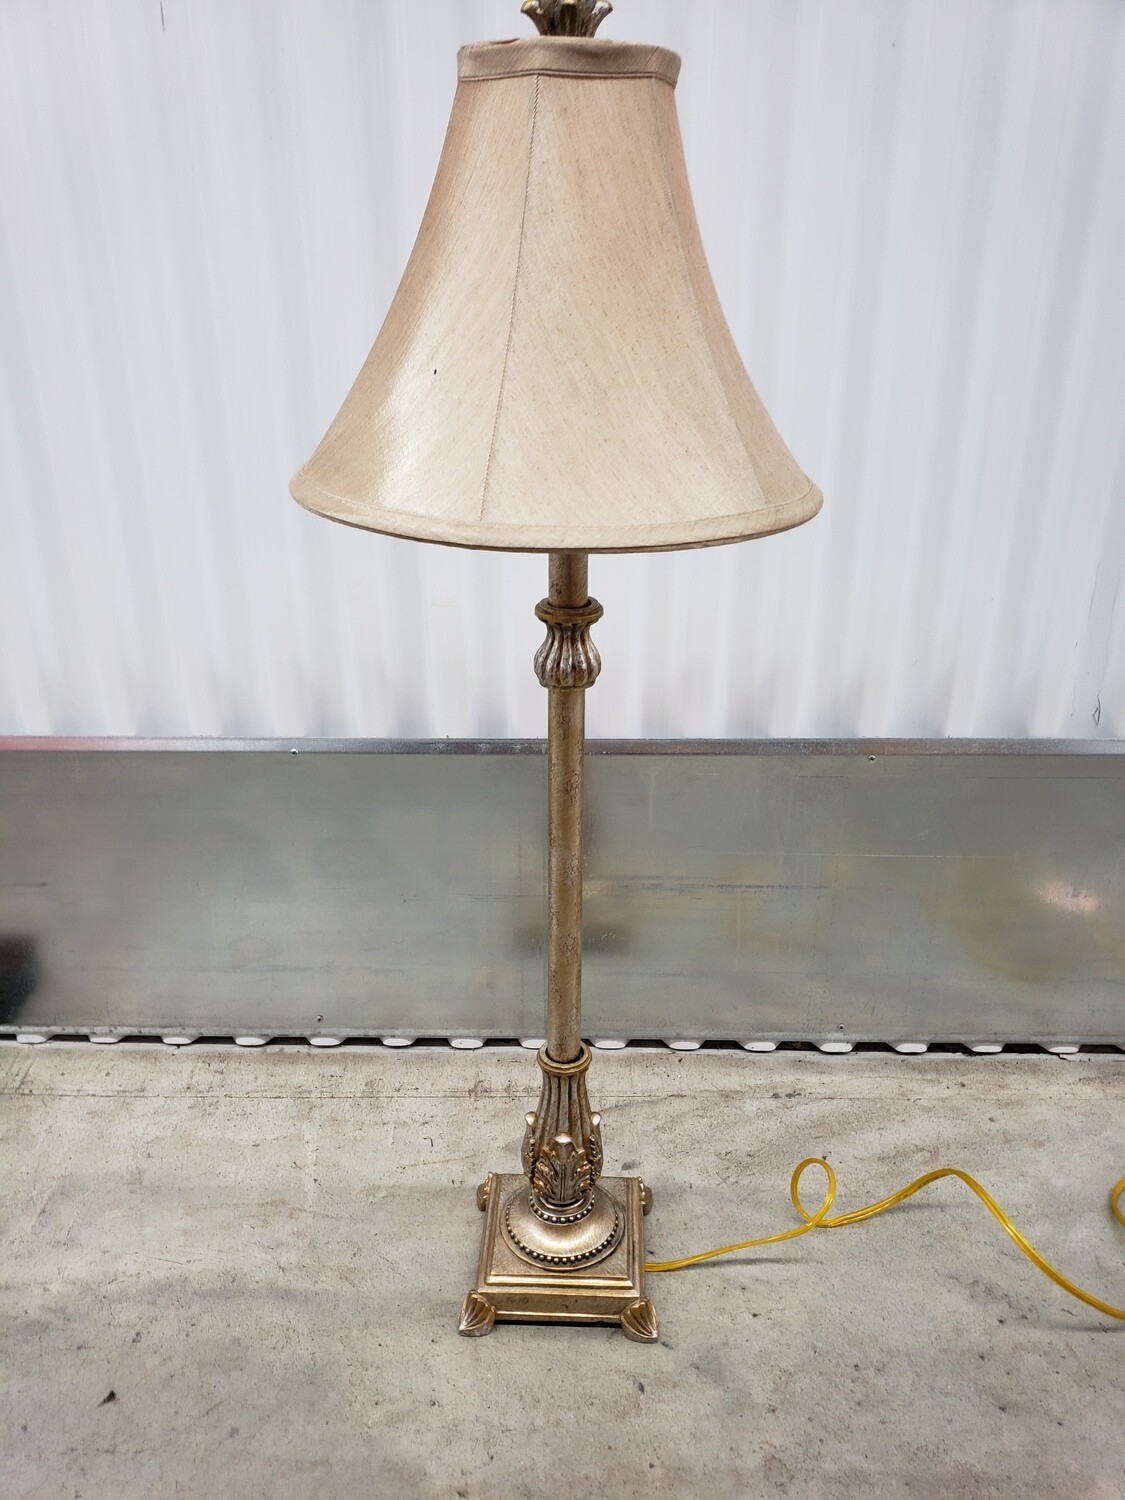 Tall Beige Table Lamp with ornate base #2109